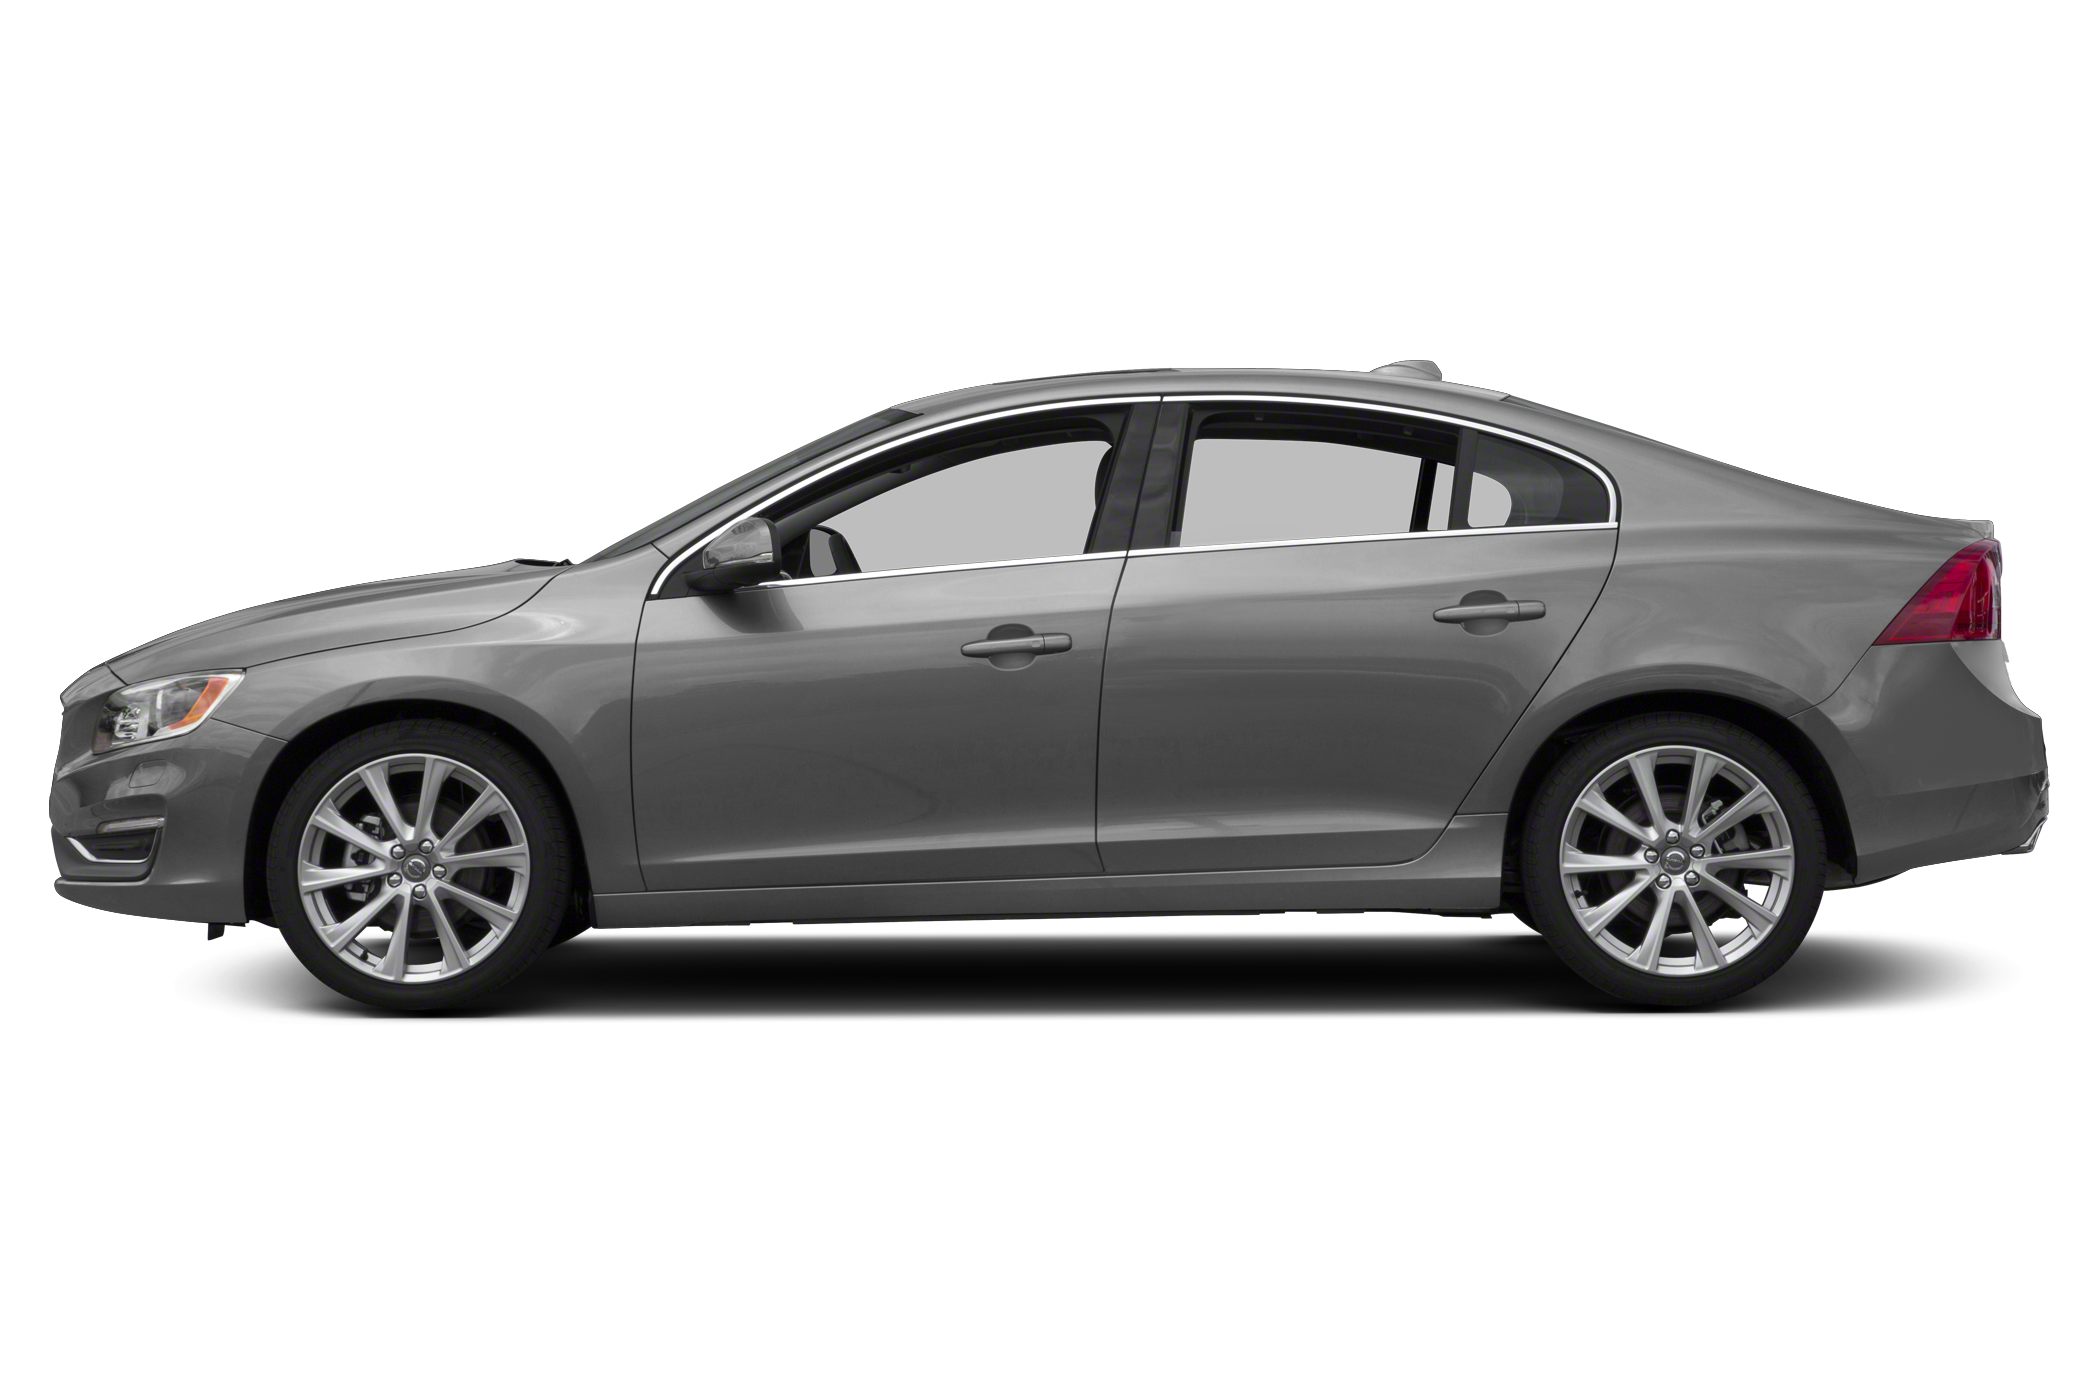 Find Special Purchase And Lease Offers For Portland Beaverton Volvo Pers In Golden Valley Near Minneapolis A New 2017 2018 S60